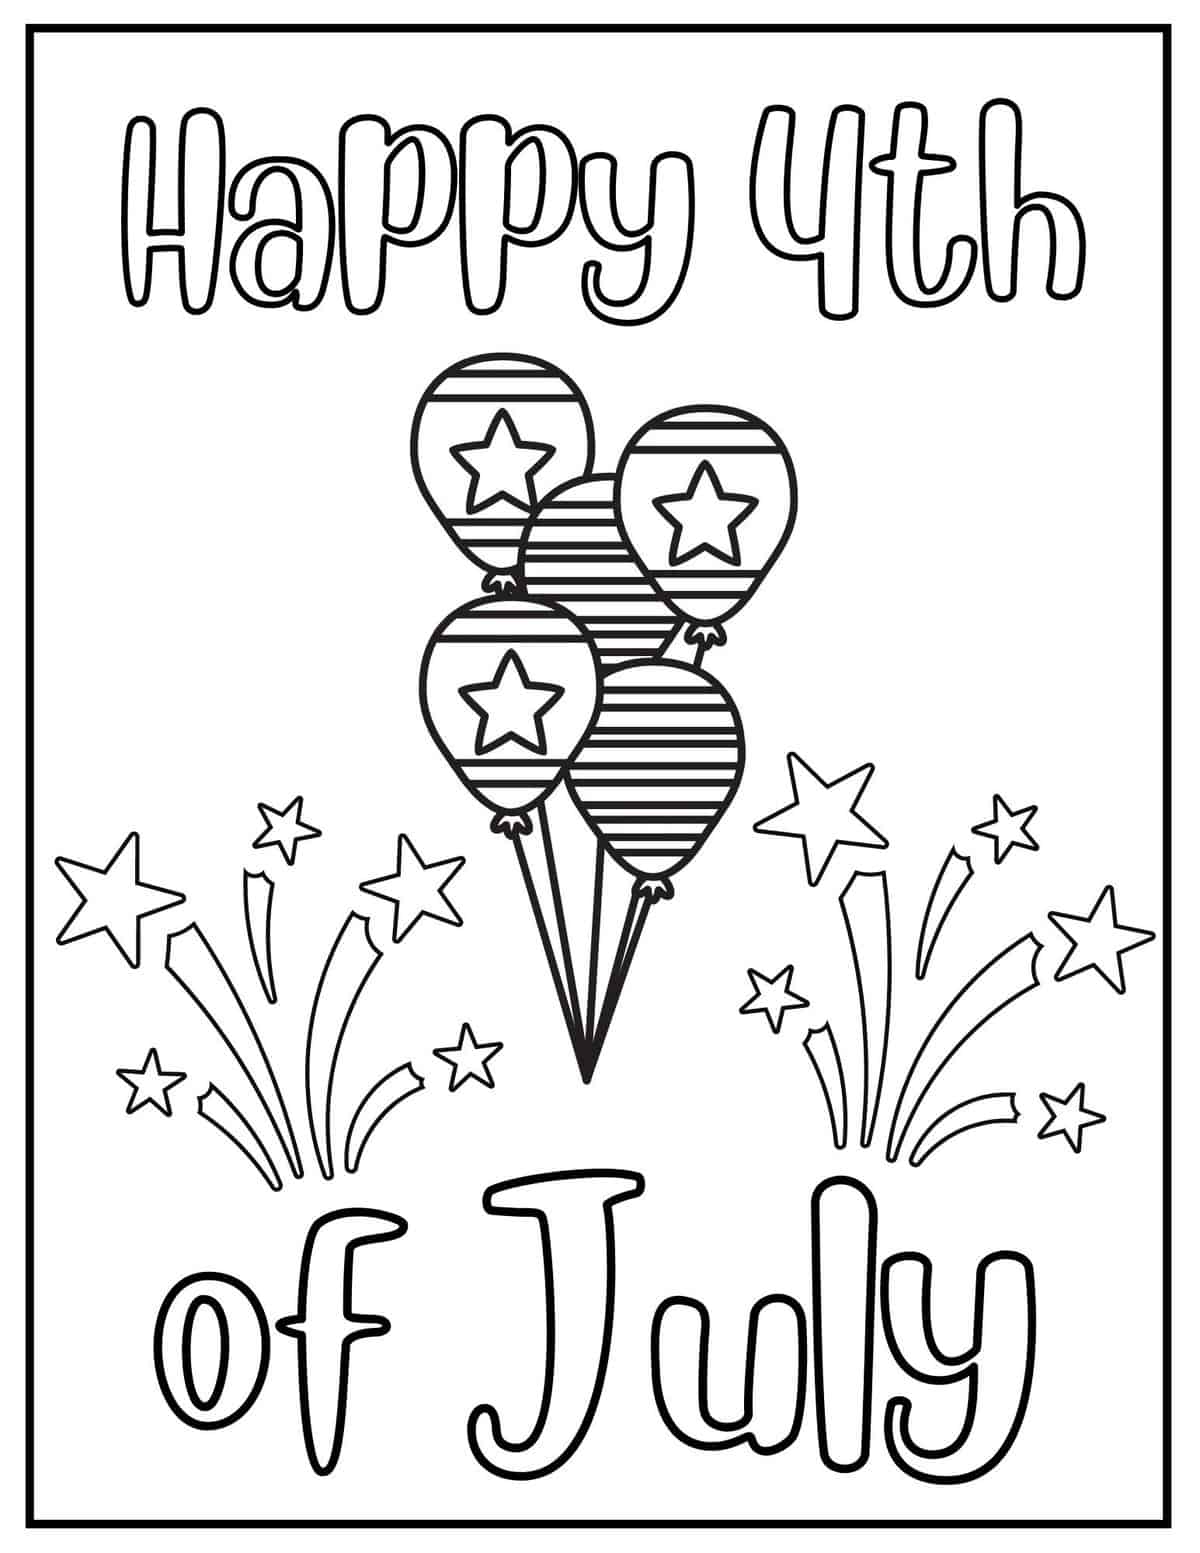 Independence Day coloring sheet with fireworks and balloons